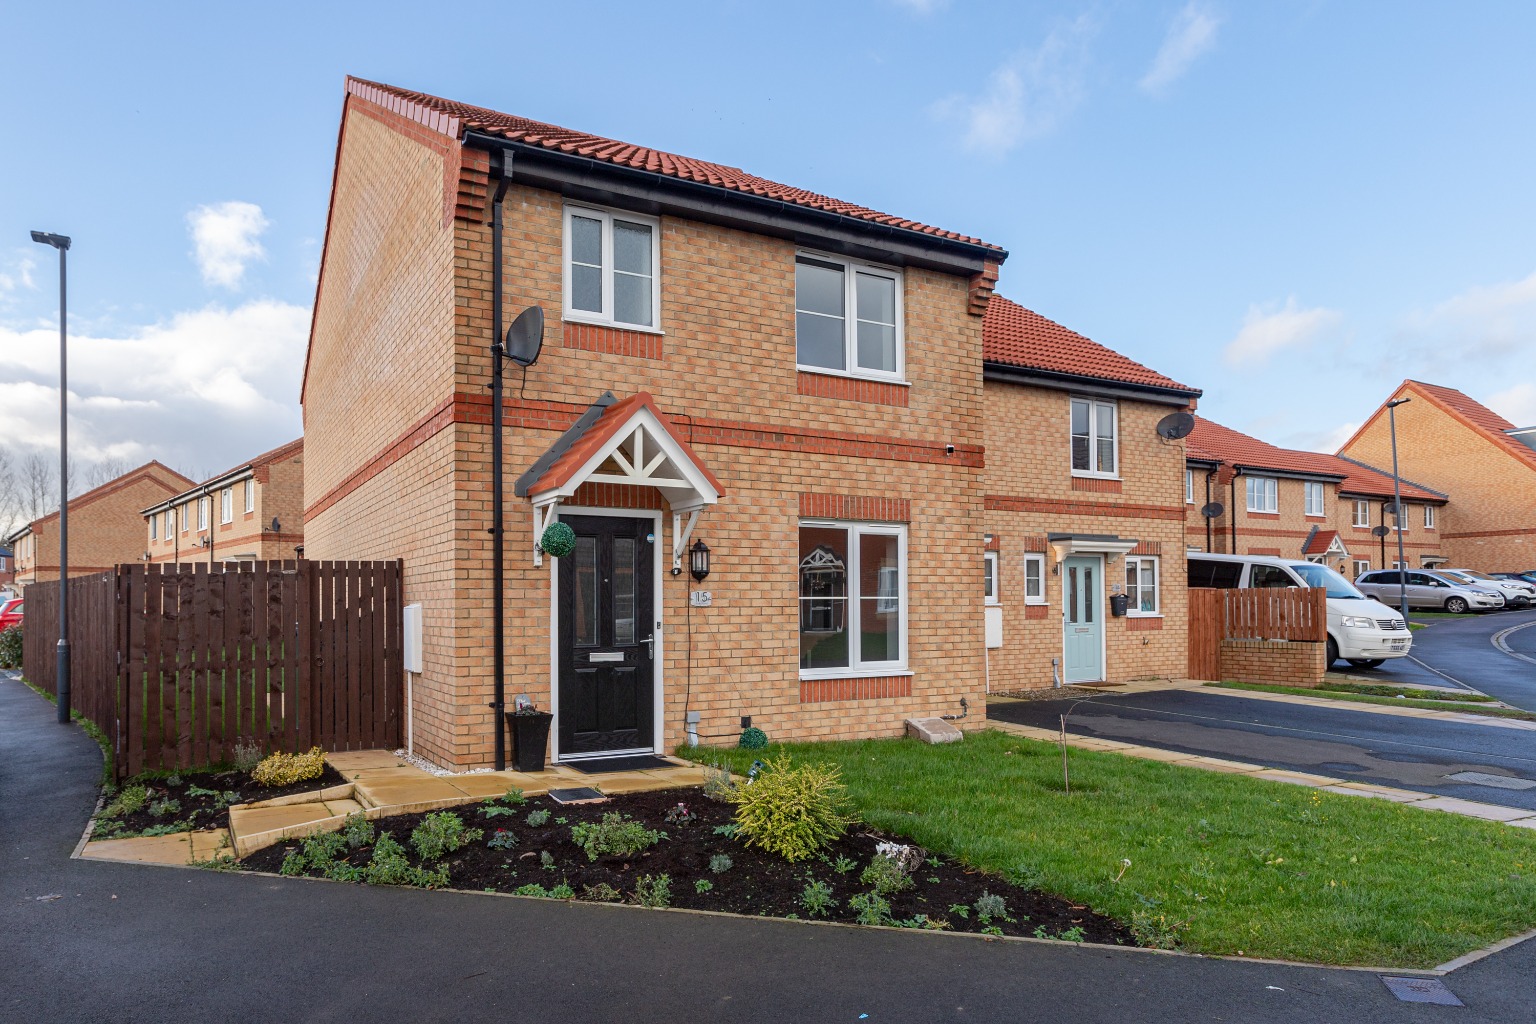 3 bed semi-detached house to rent in Rosebud Way, Catterick Garrison - Property Image 1